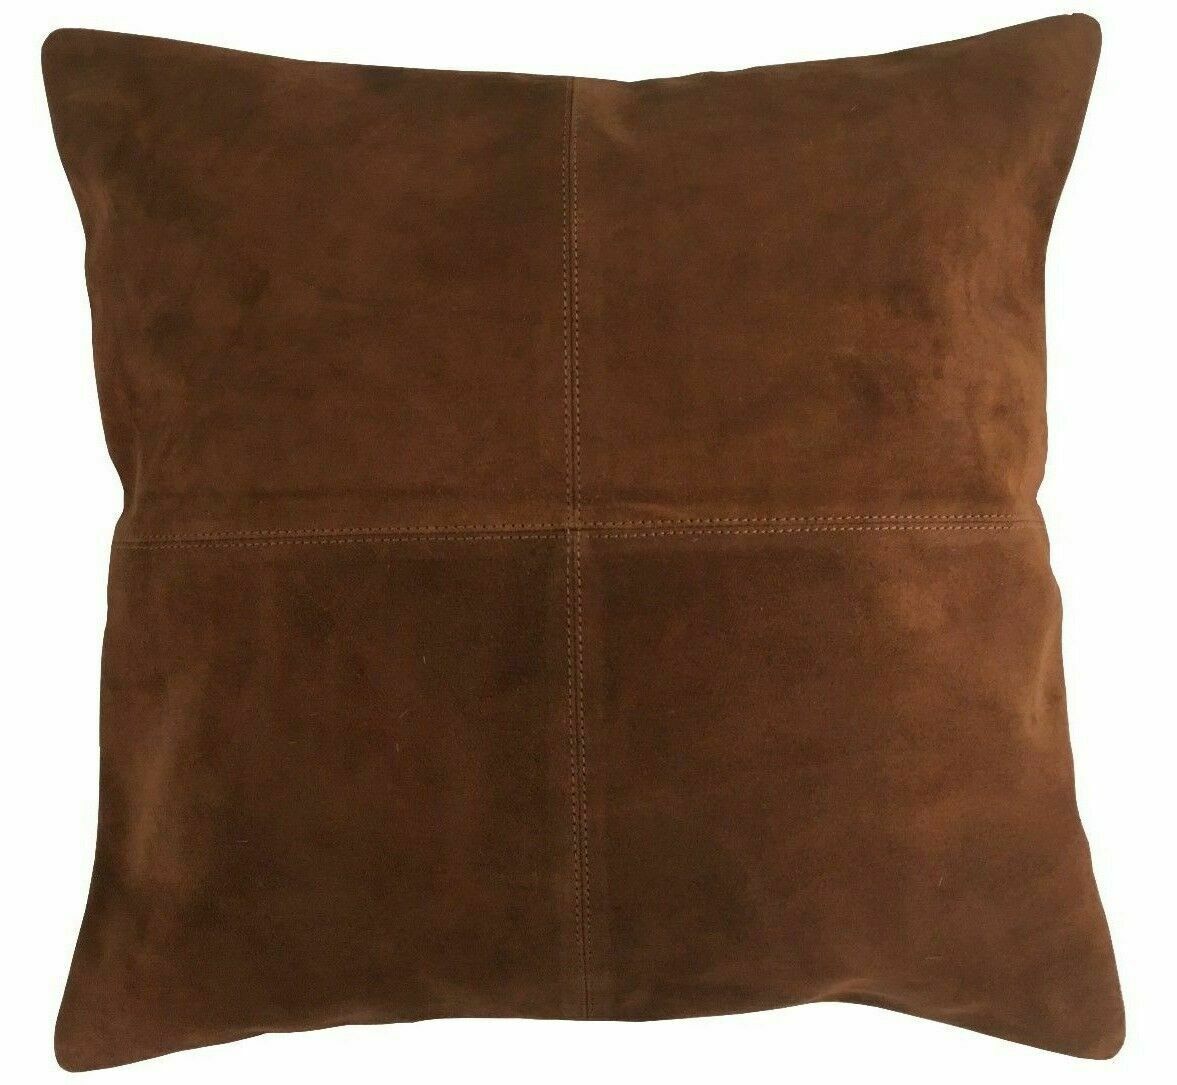 Noora Soft Genuine Suede Leather Pillow Cover Cushion Cover